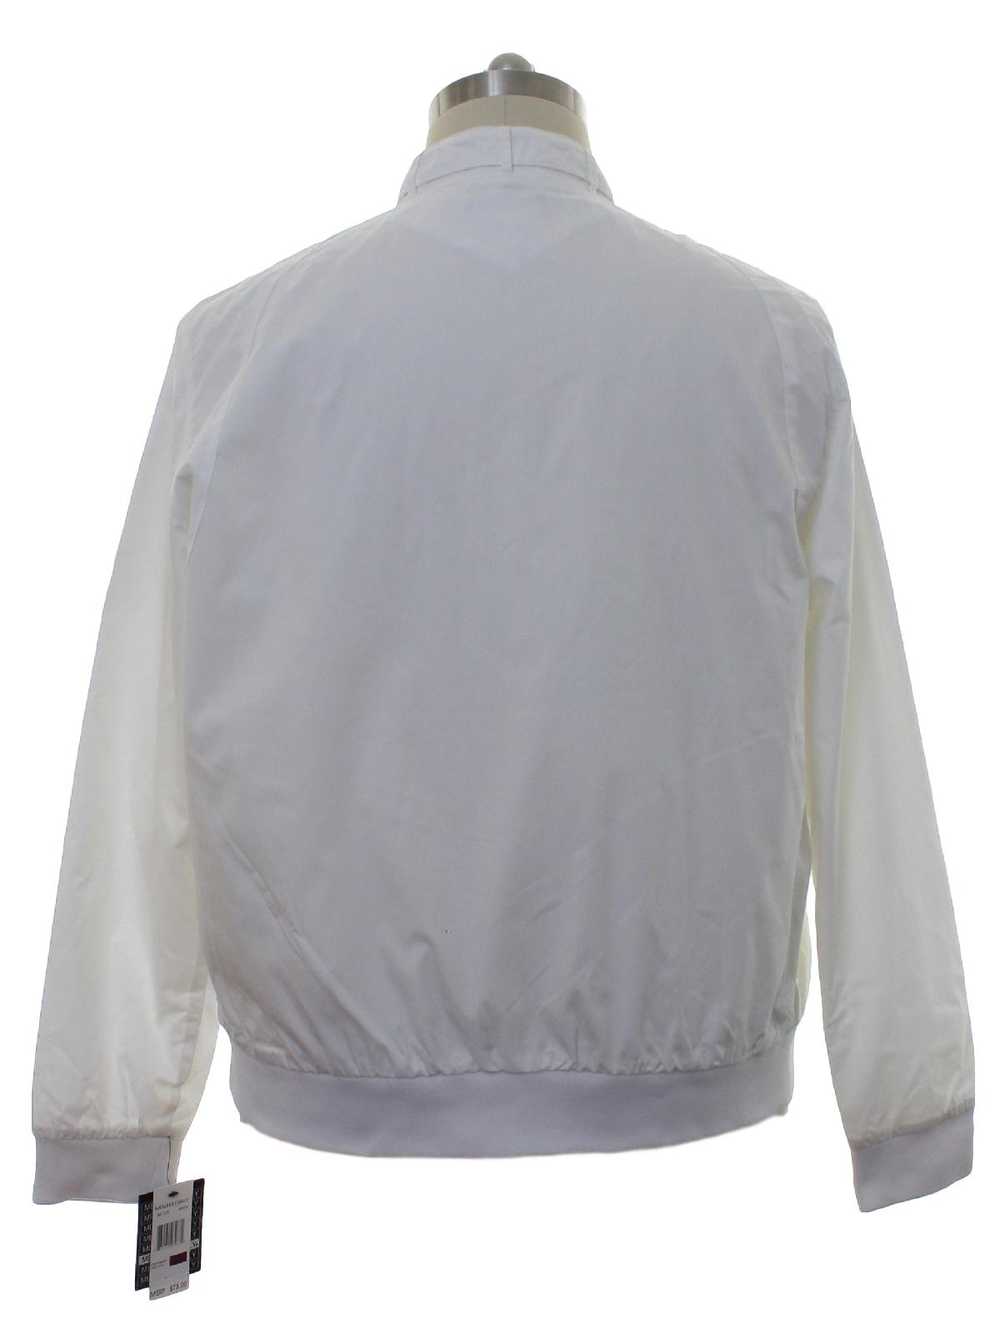 1980's Members Only Mens Members Only Jacket - image 3